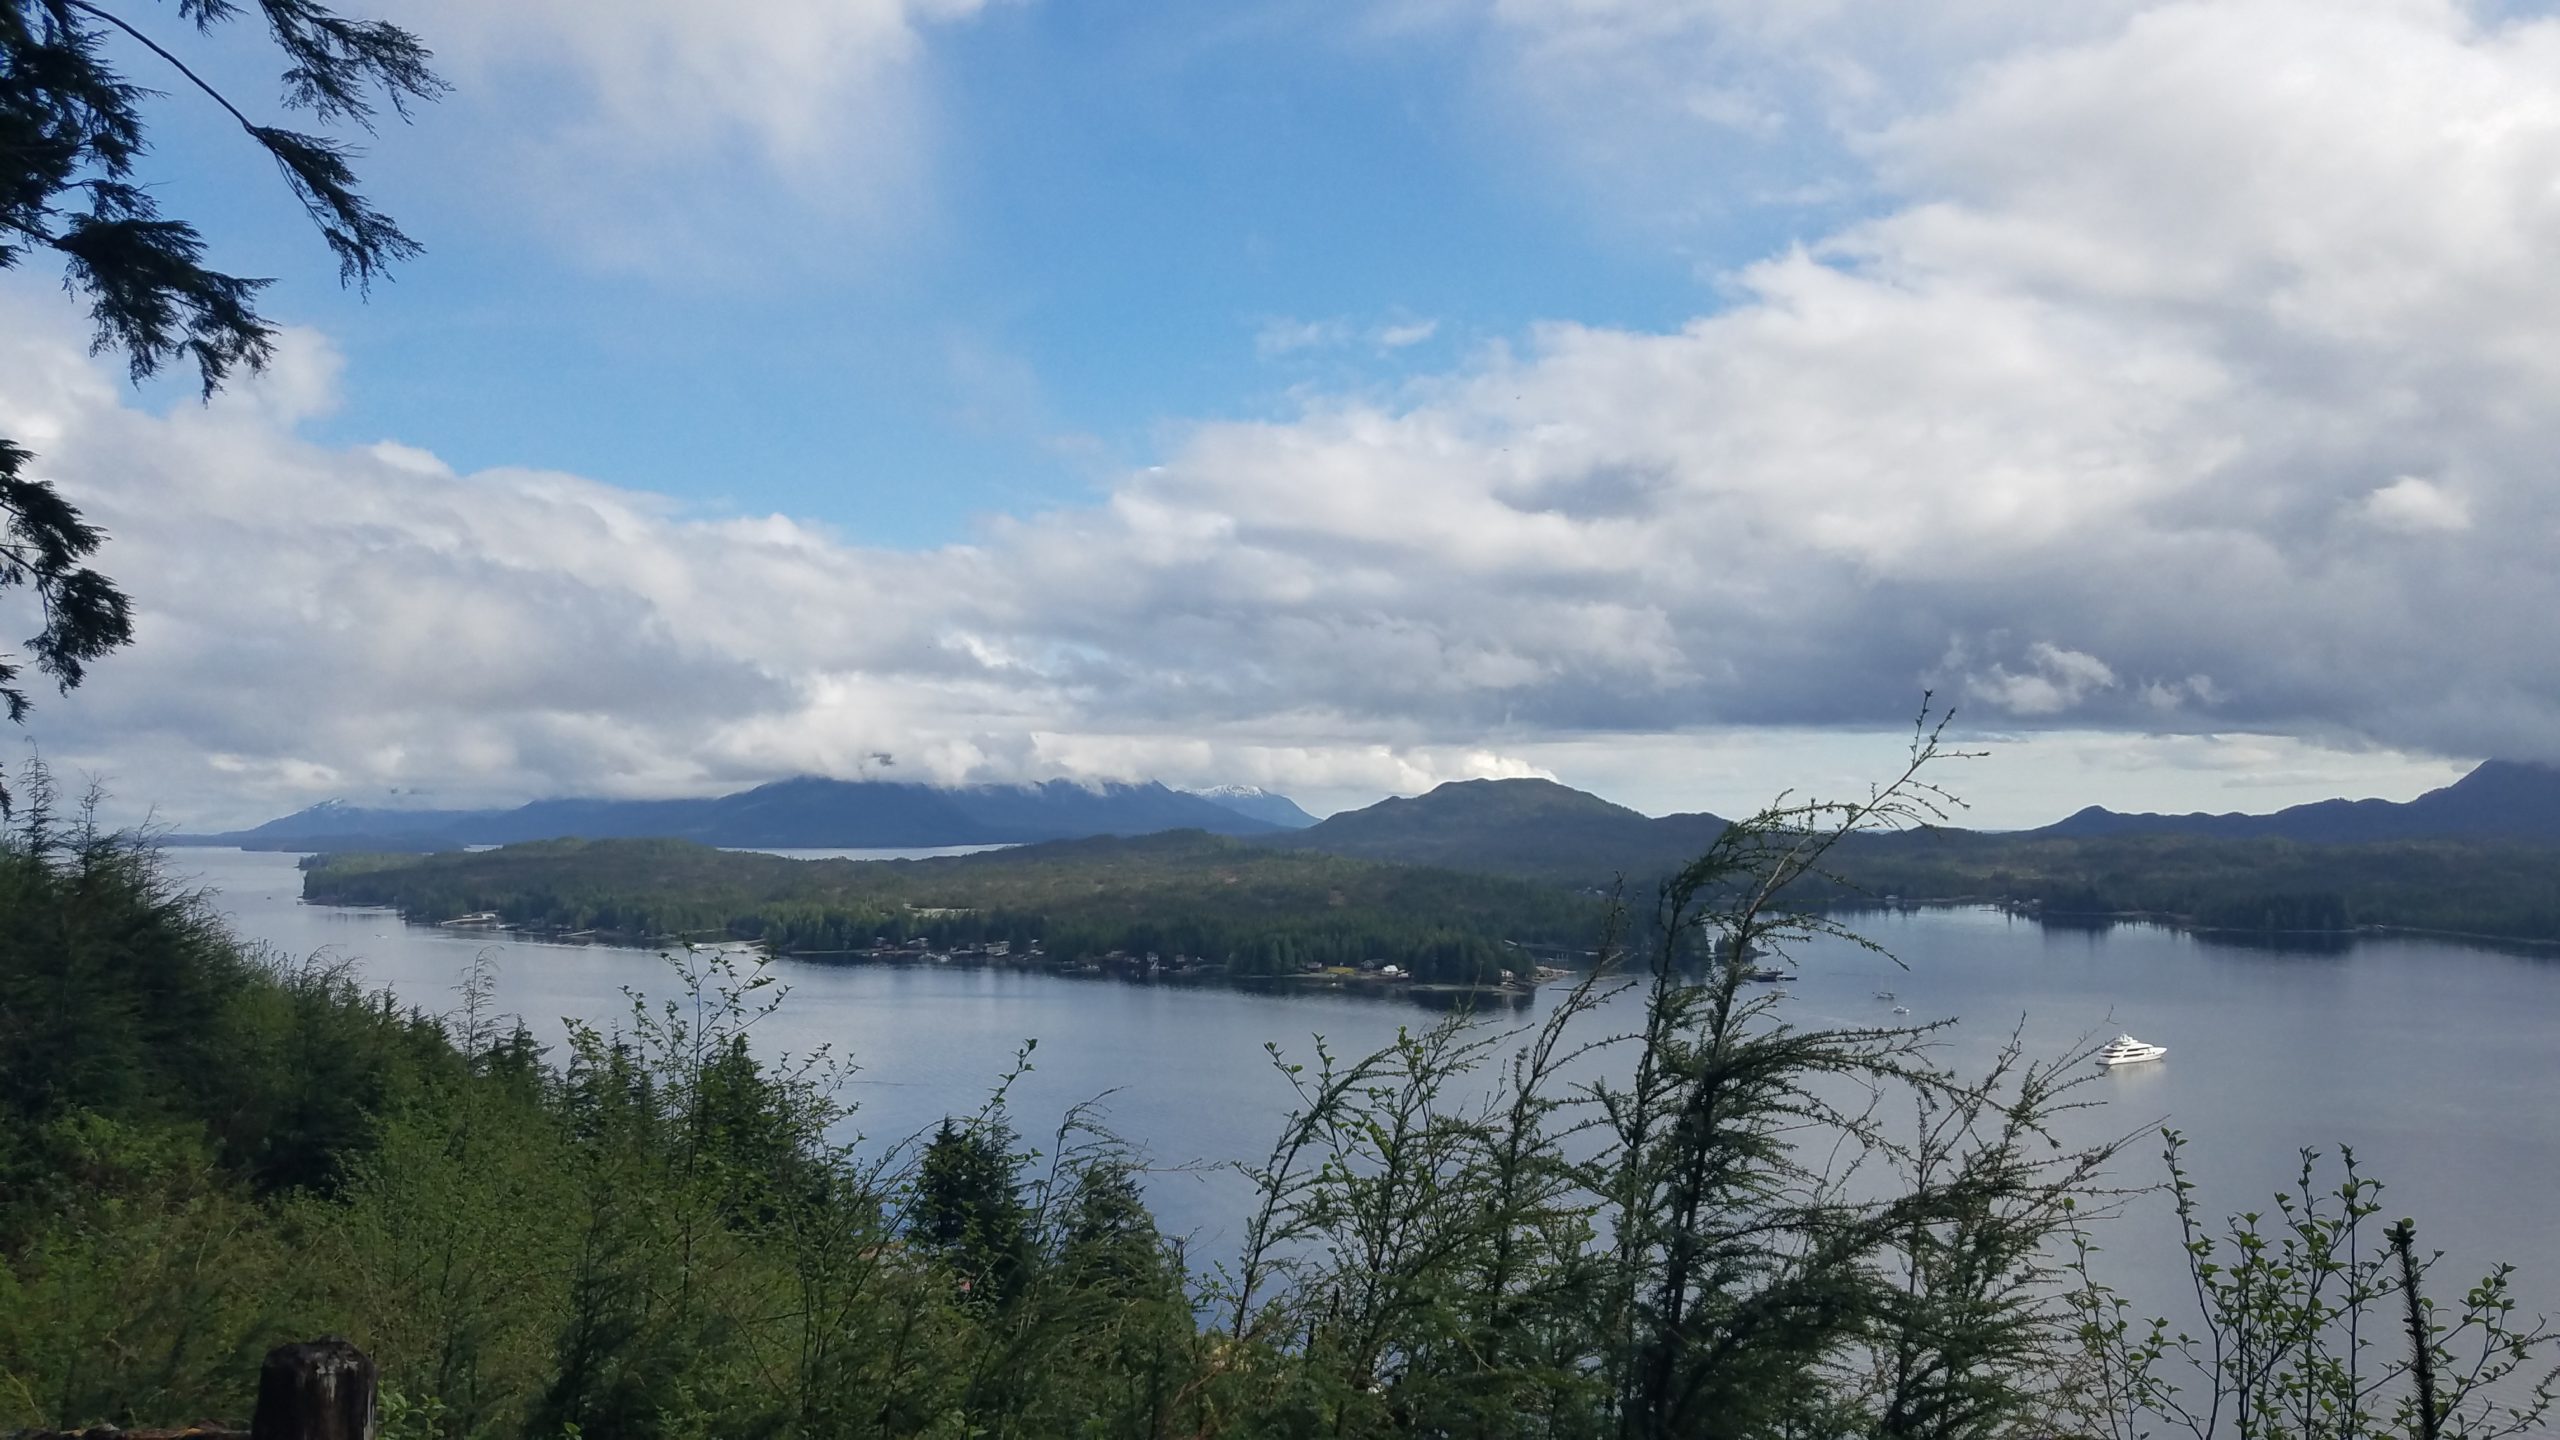 View of Ketchikan (small town in Alaska), partly cloudy